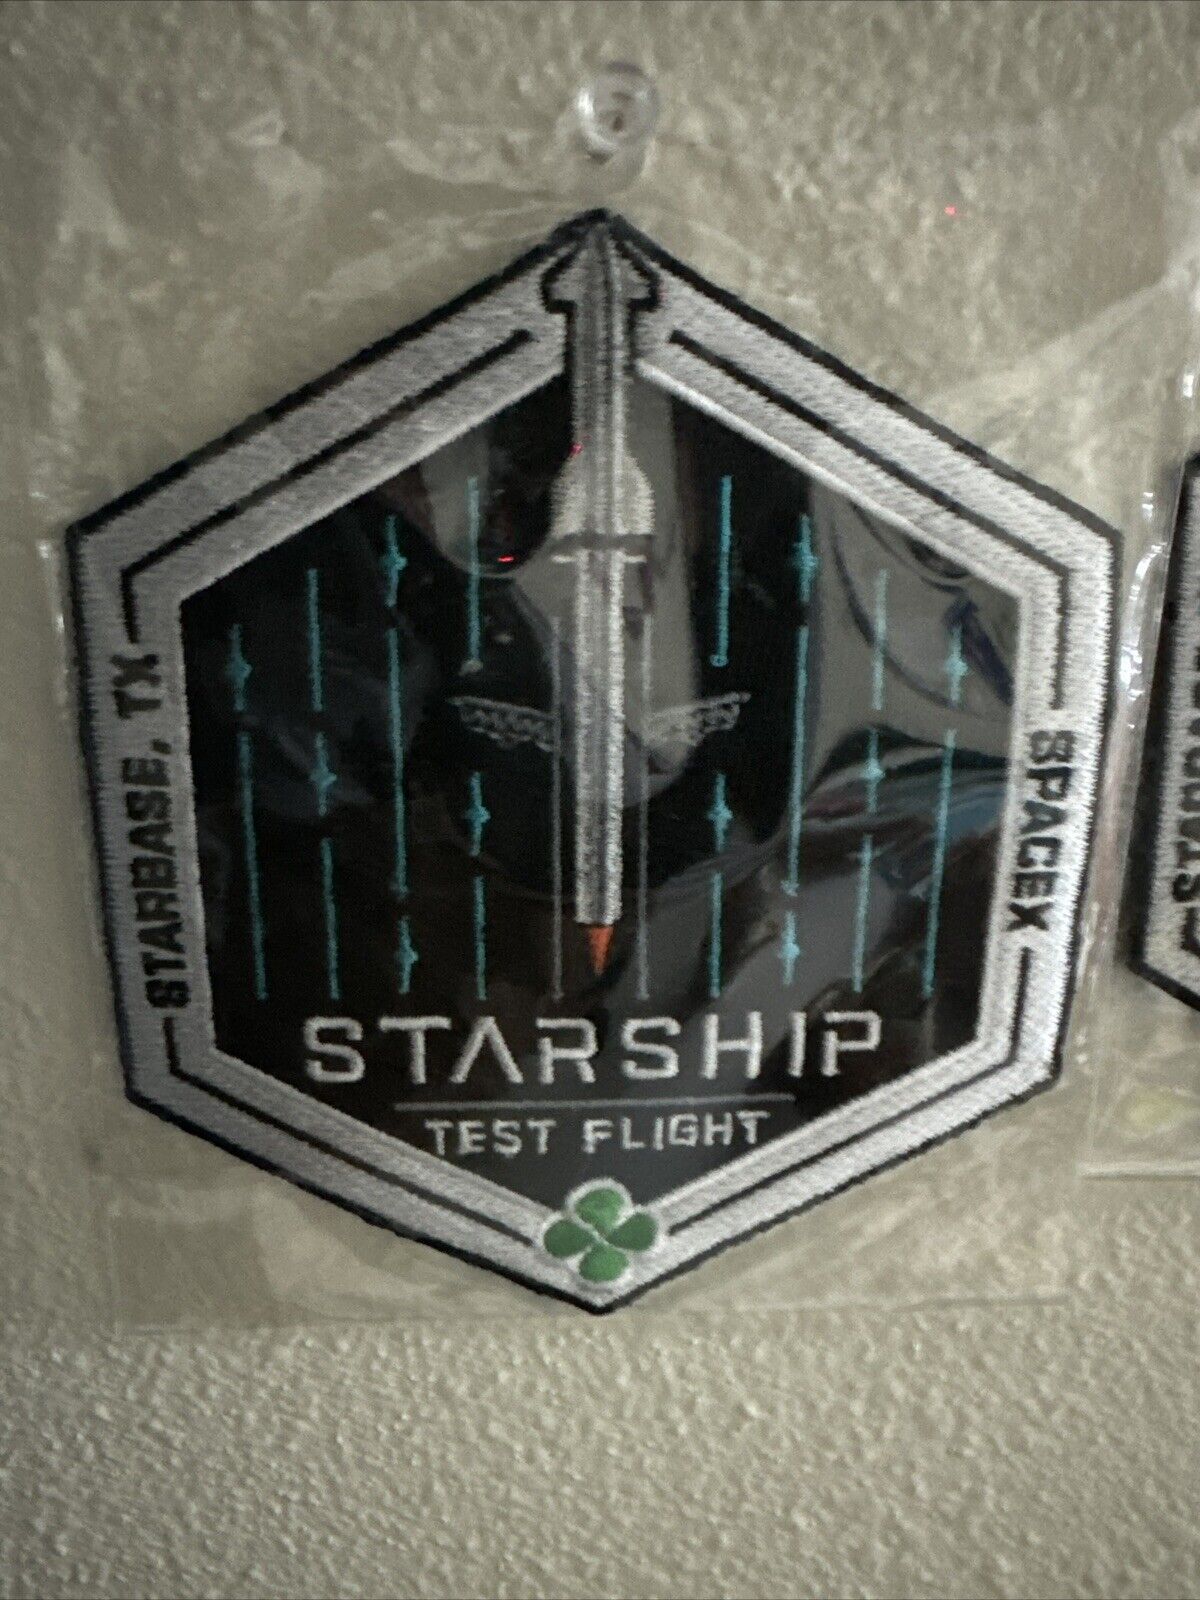 SpaceX STARSHIP First Test Flight 1 IFT-1, SN24, Official Employee X Patch